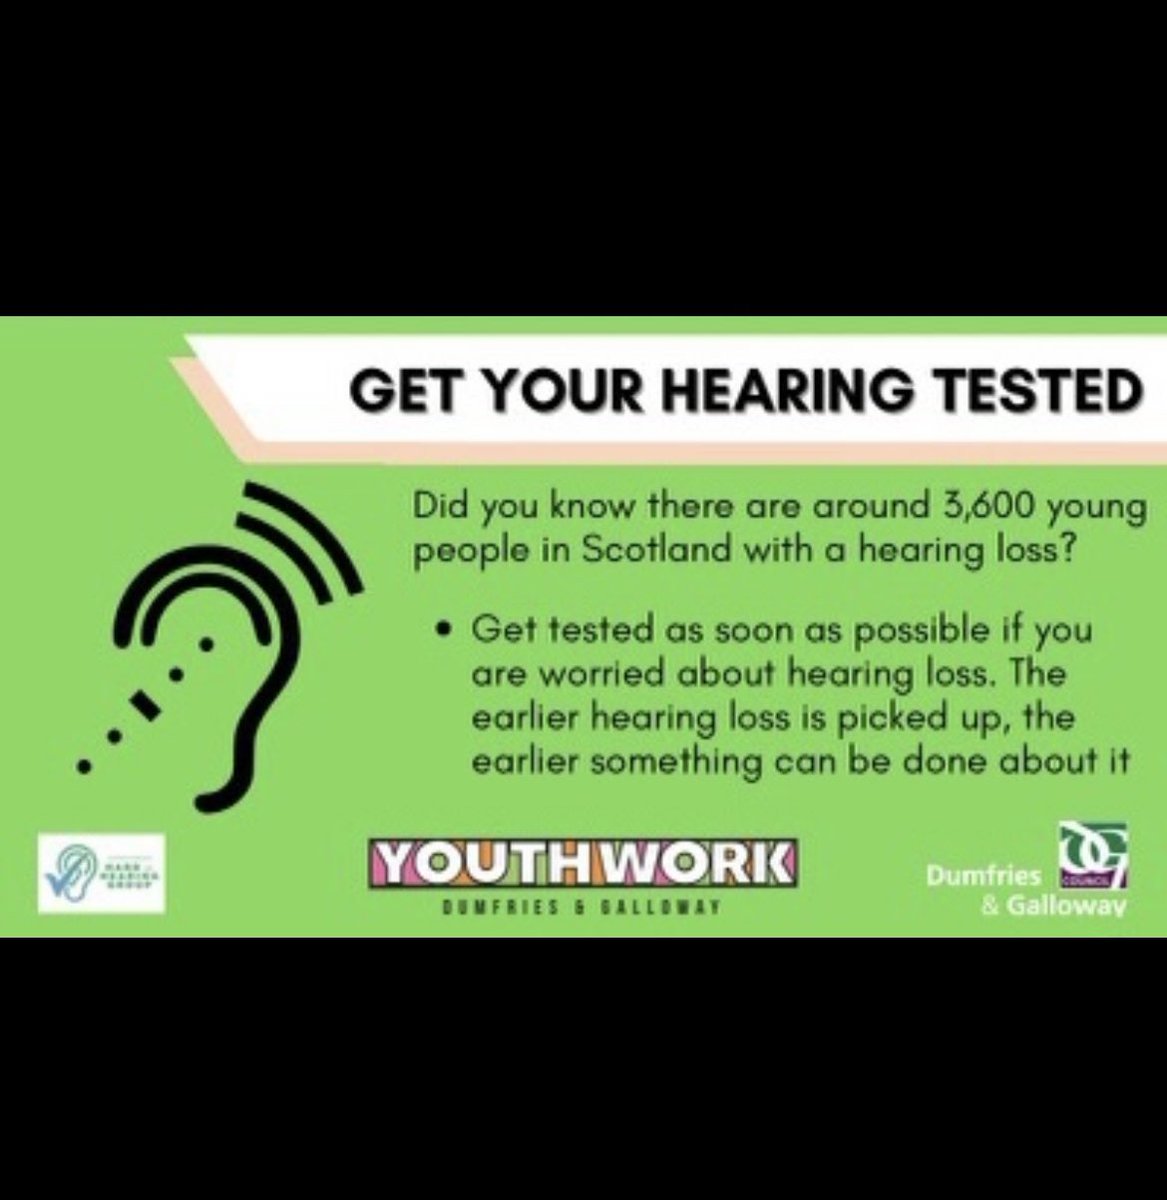 #WorldHearingDay2022 🌎🦻
This year is focusing on the importance of safe listening as a means of maintaining good hearing throughout your life.

We start off with some top tips to help you look after your hearing!! 

#YouthWorkChangesLives #safelistening #hearingcare